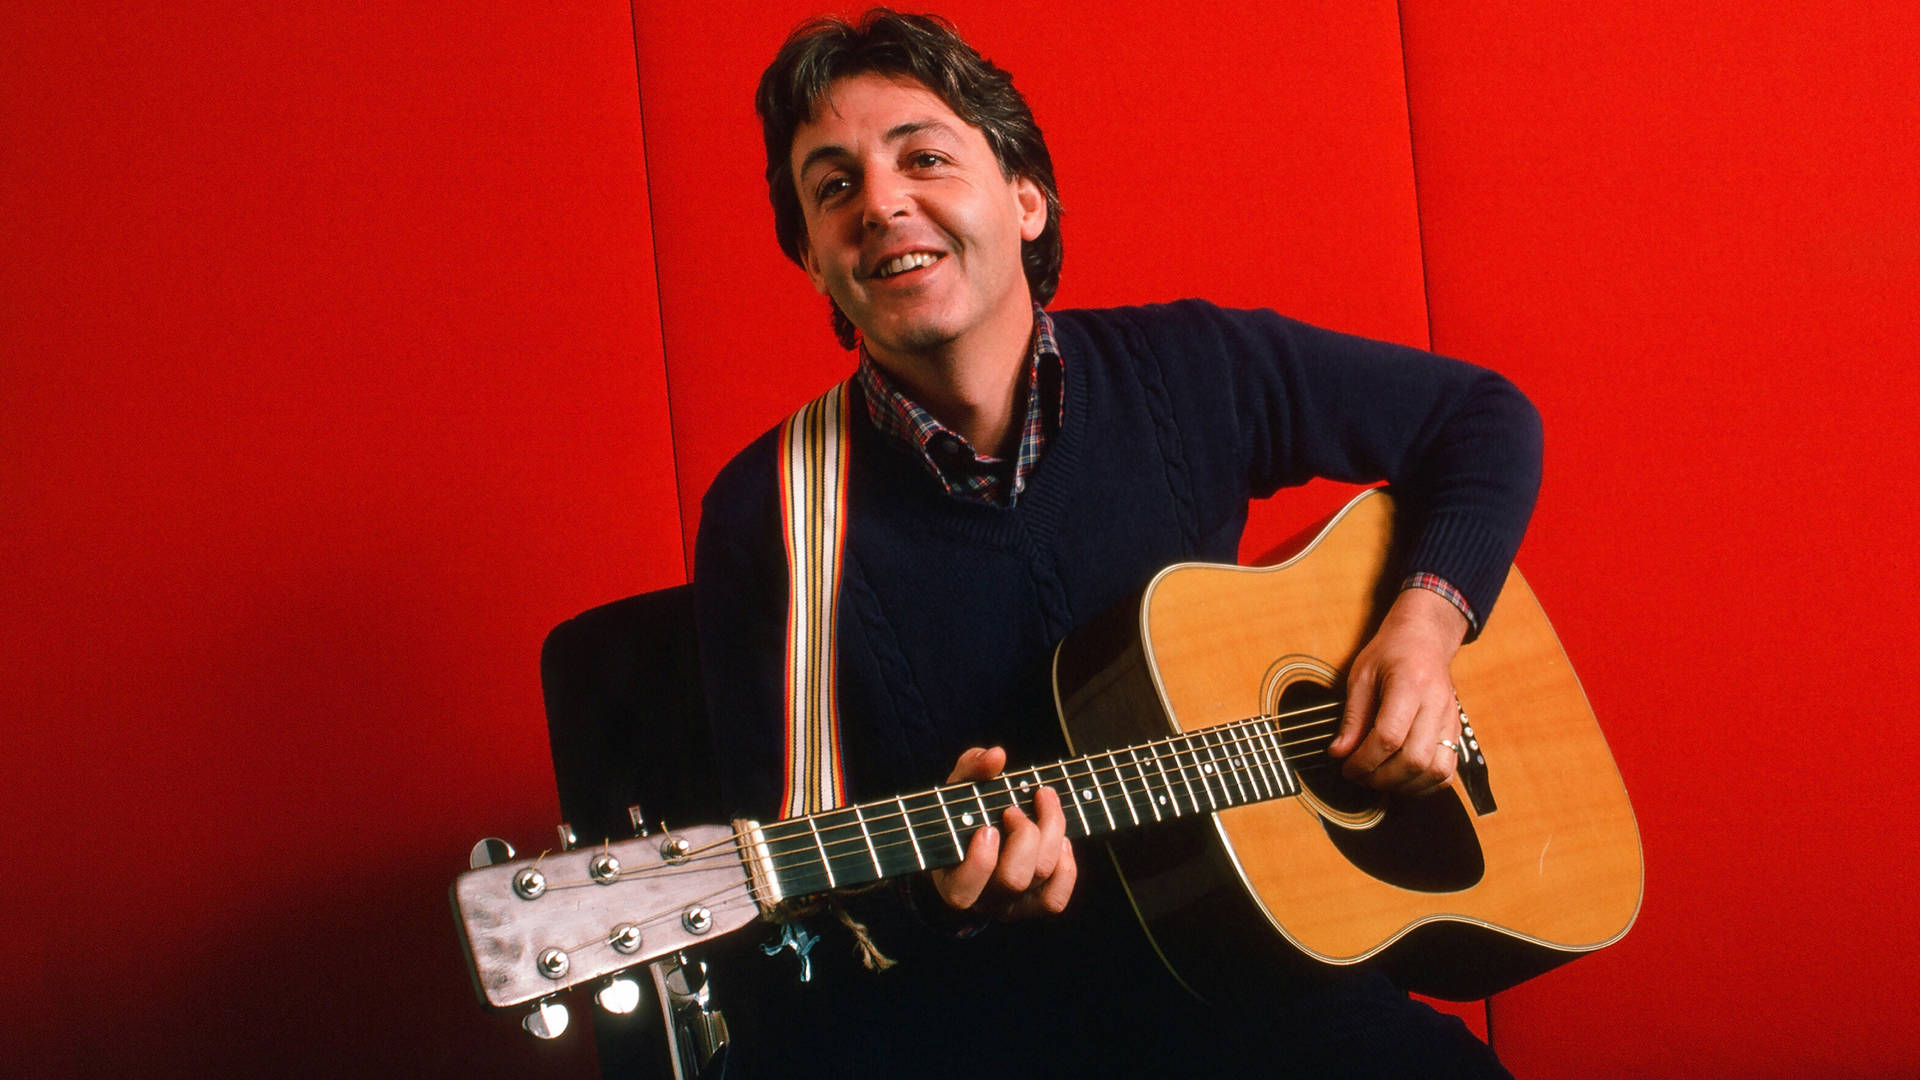 Paul McCartney Young Red Background Wallpaper